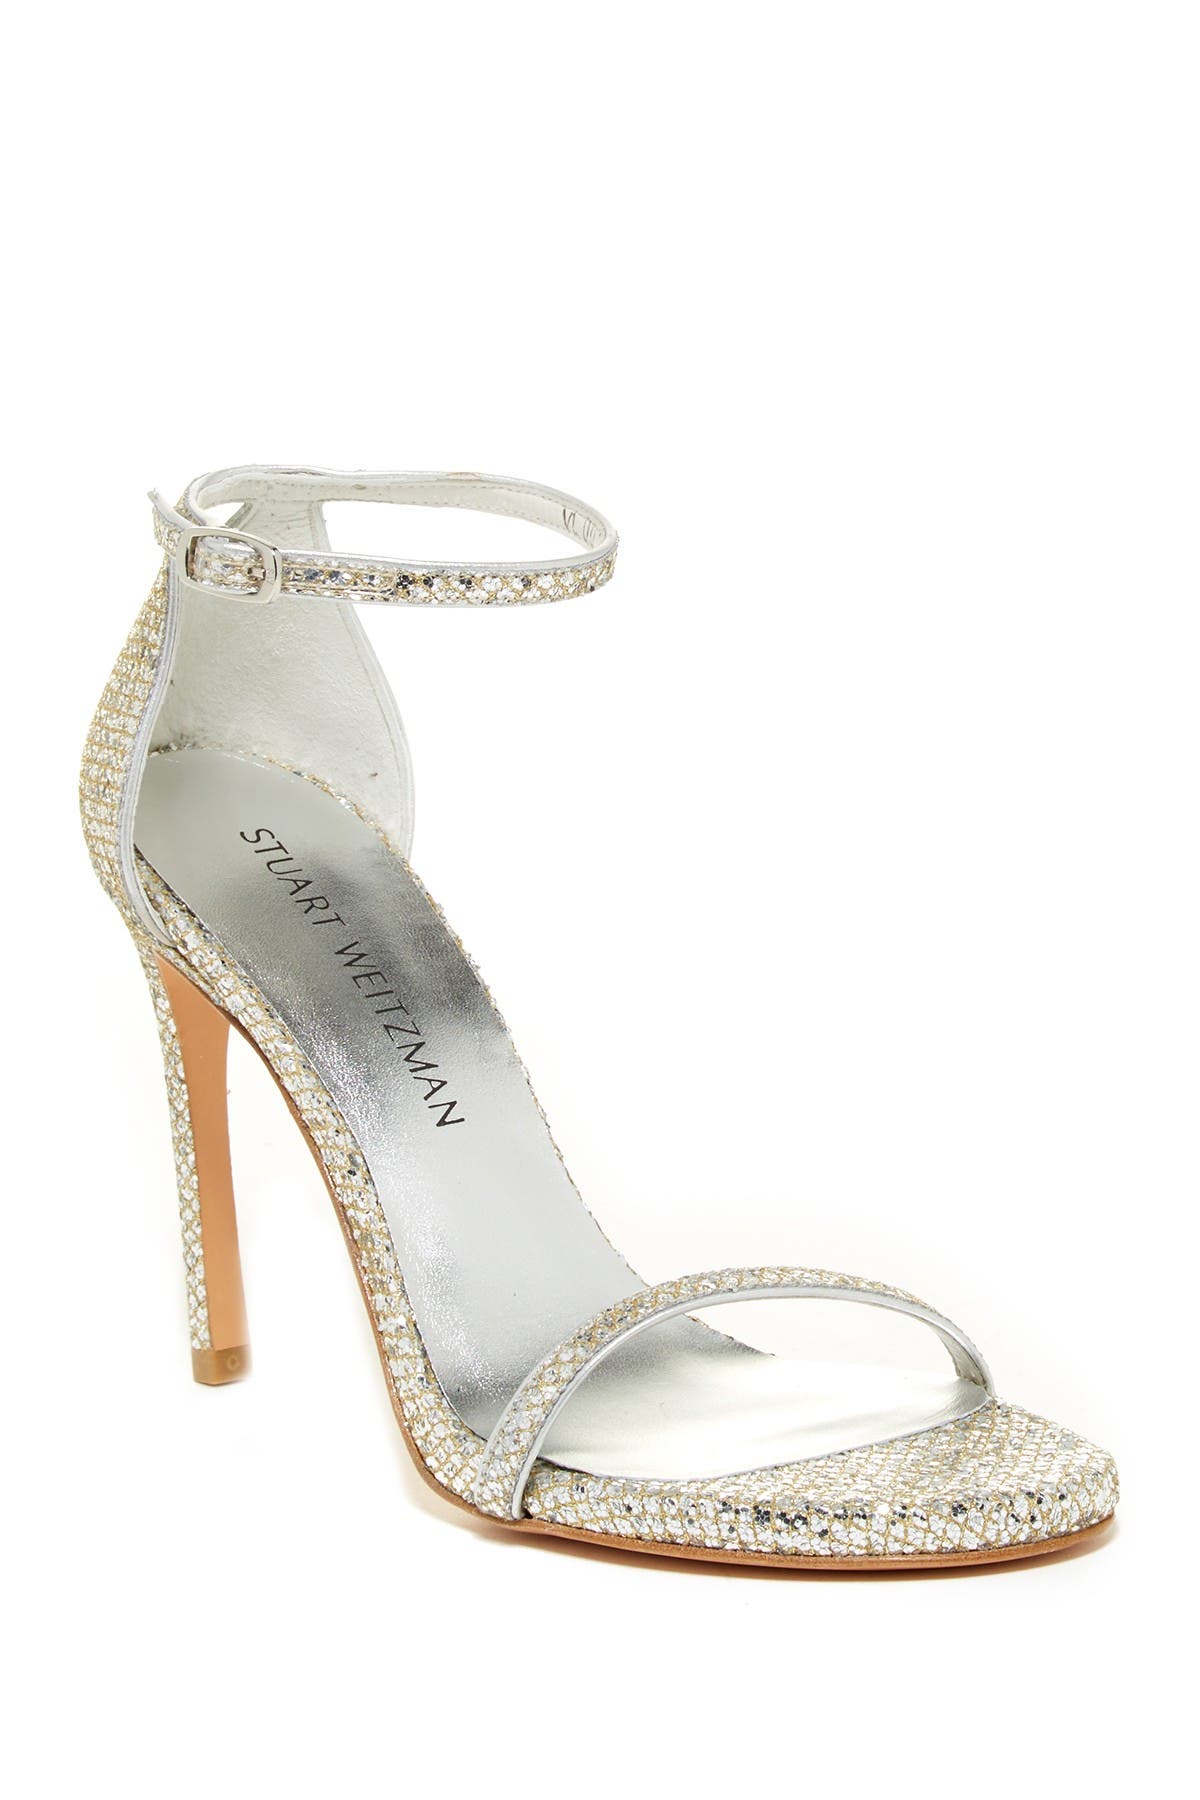 nudistsong ankle strap sandal